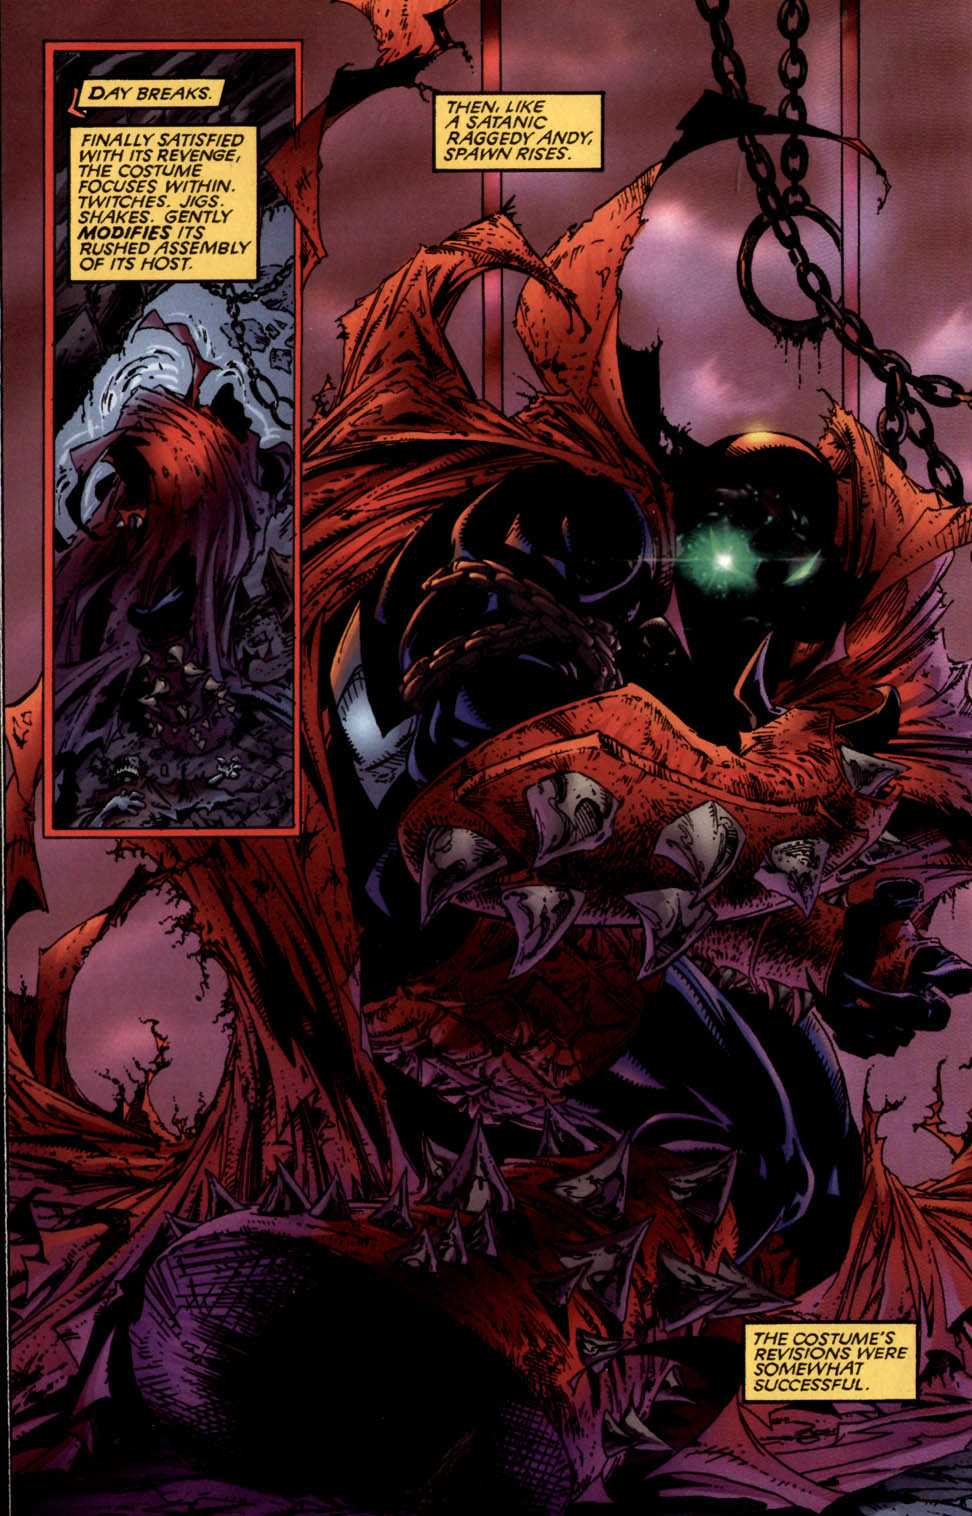 spawn comics pages - Day Breaks. Then, A Satanic Raggedy Andy, Spawn Rises. Bodog Finally Satisfied With Its Revenge The Costume Focuses Within. Twitches. Jigs. Shakes. Gently Modifies Its Rushed Assembly Of Its Host 17 The Costume'S Revisions Were Somewh